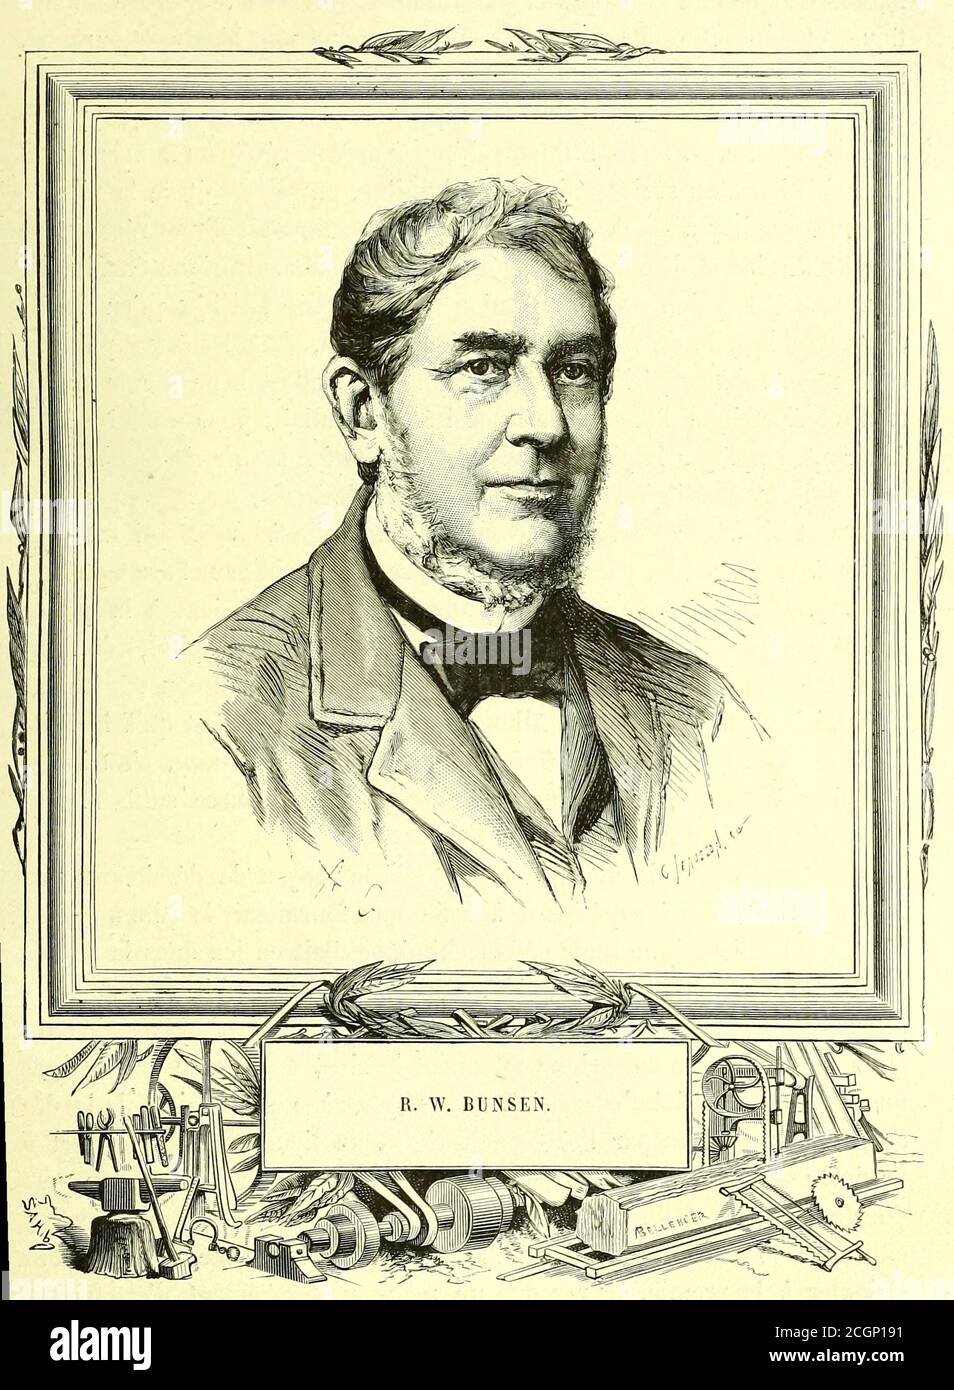 Robert Wilhelm Eberhard Bunsen (30 March 1811 – 16 August 1899) was a German chemist. He investigated emission spectra of heated elements, and discovered caesium (in 1860) and rubidium (in 1861) with the physicist Gustav Kirchhoff. From the Book Les merveilles de la science, ou Description populaire des inventions modernes [The Wonders of Science, or Popular Description of Modern Inventions] by Figuier, Louis, 1819-1894 Published in Paris 1867 Stock Photo